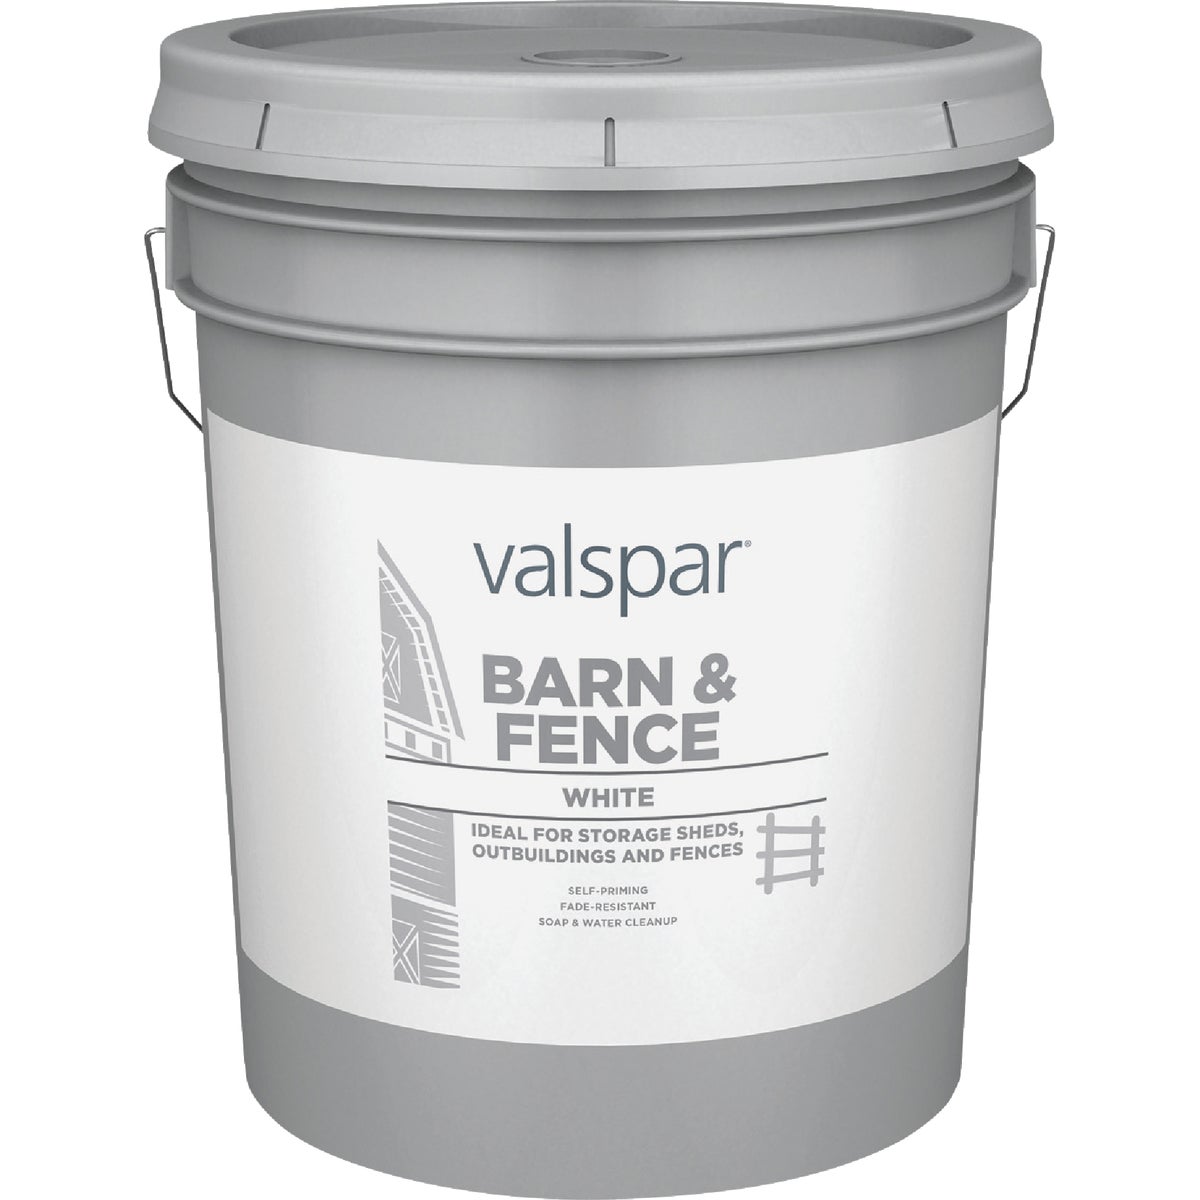 Valspar Latex Paint & Primer In One Flat Barn & Fence Paint, White, 5 Gal.